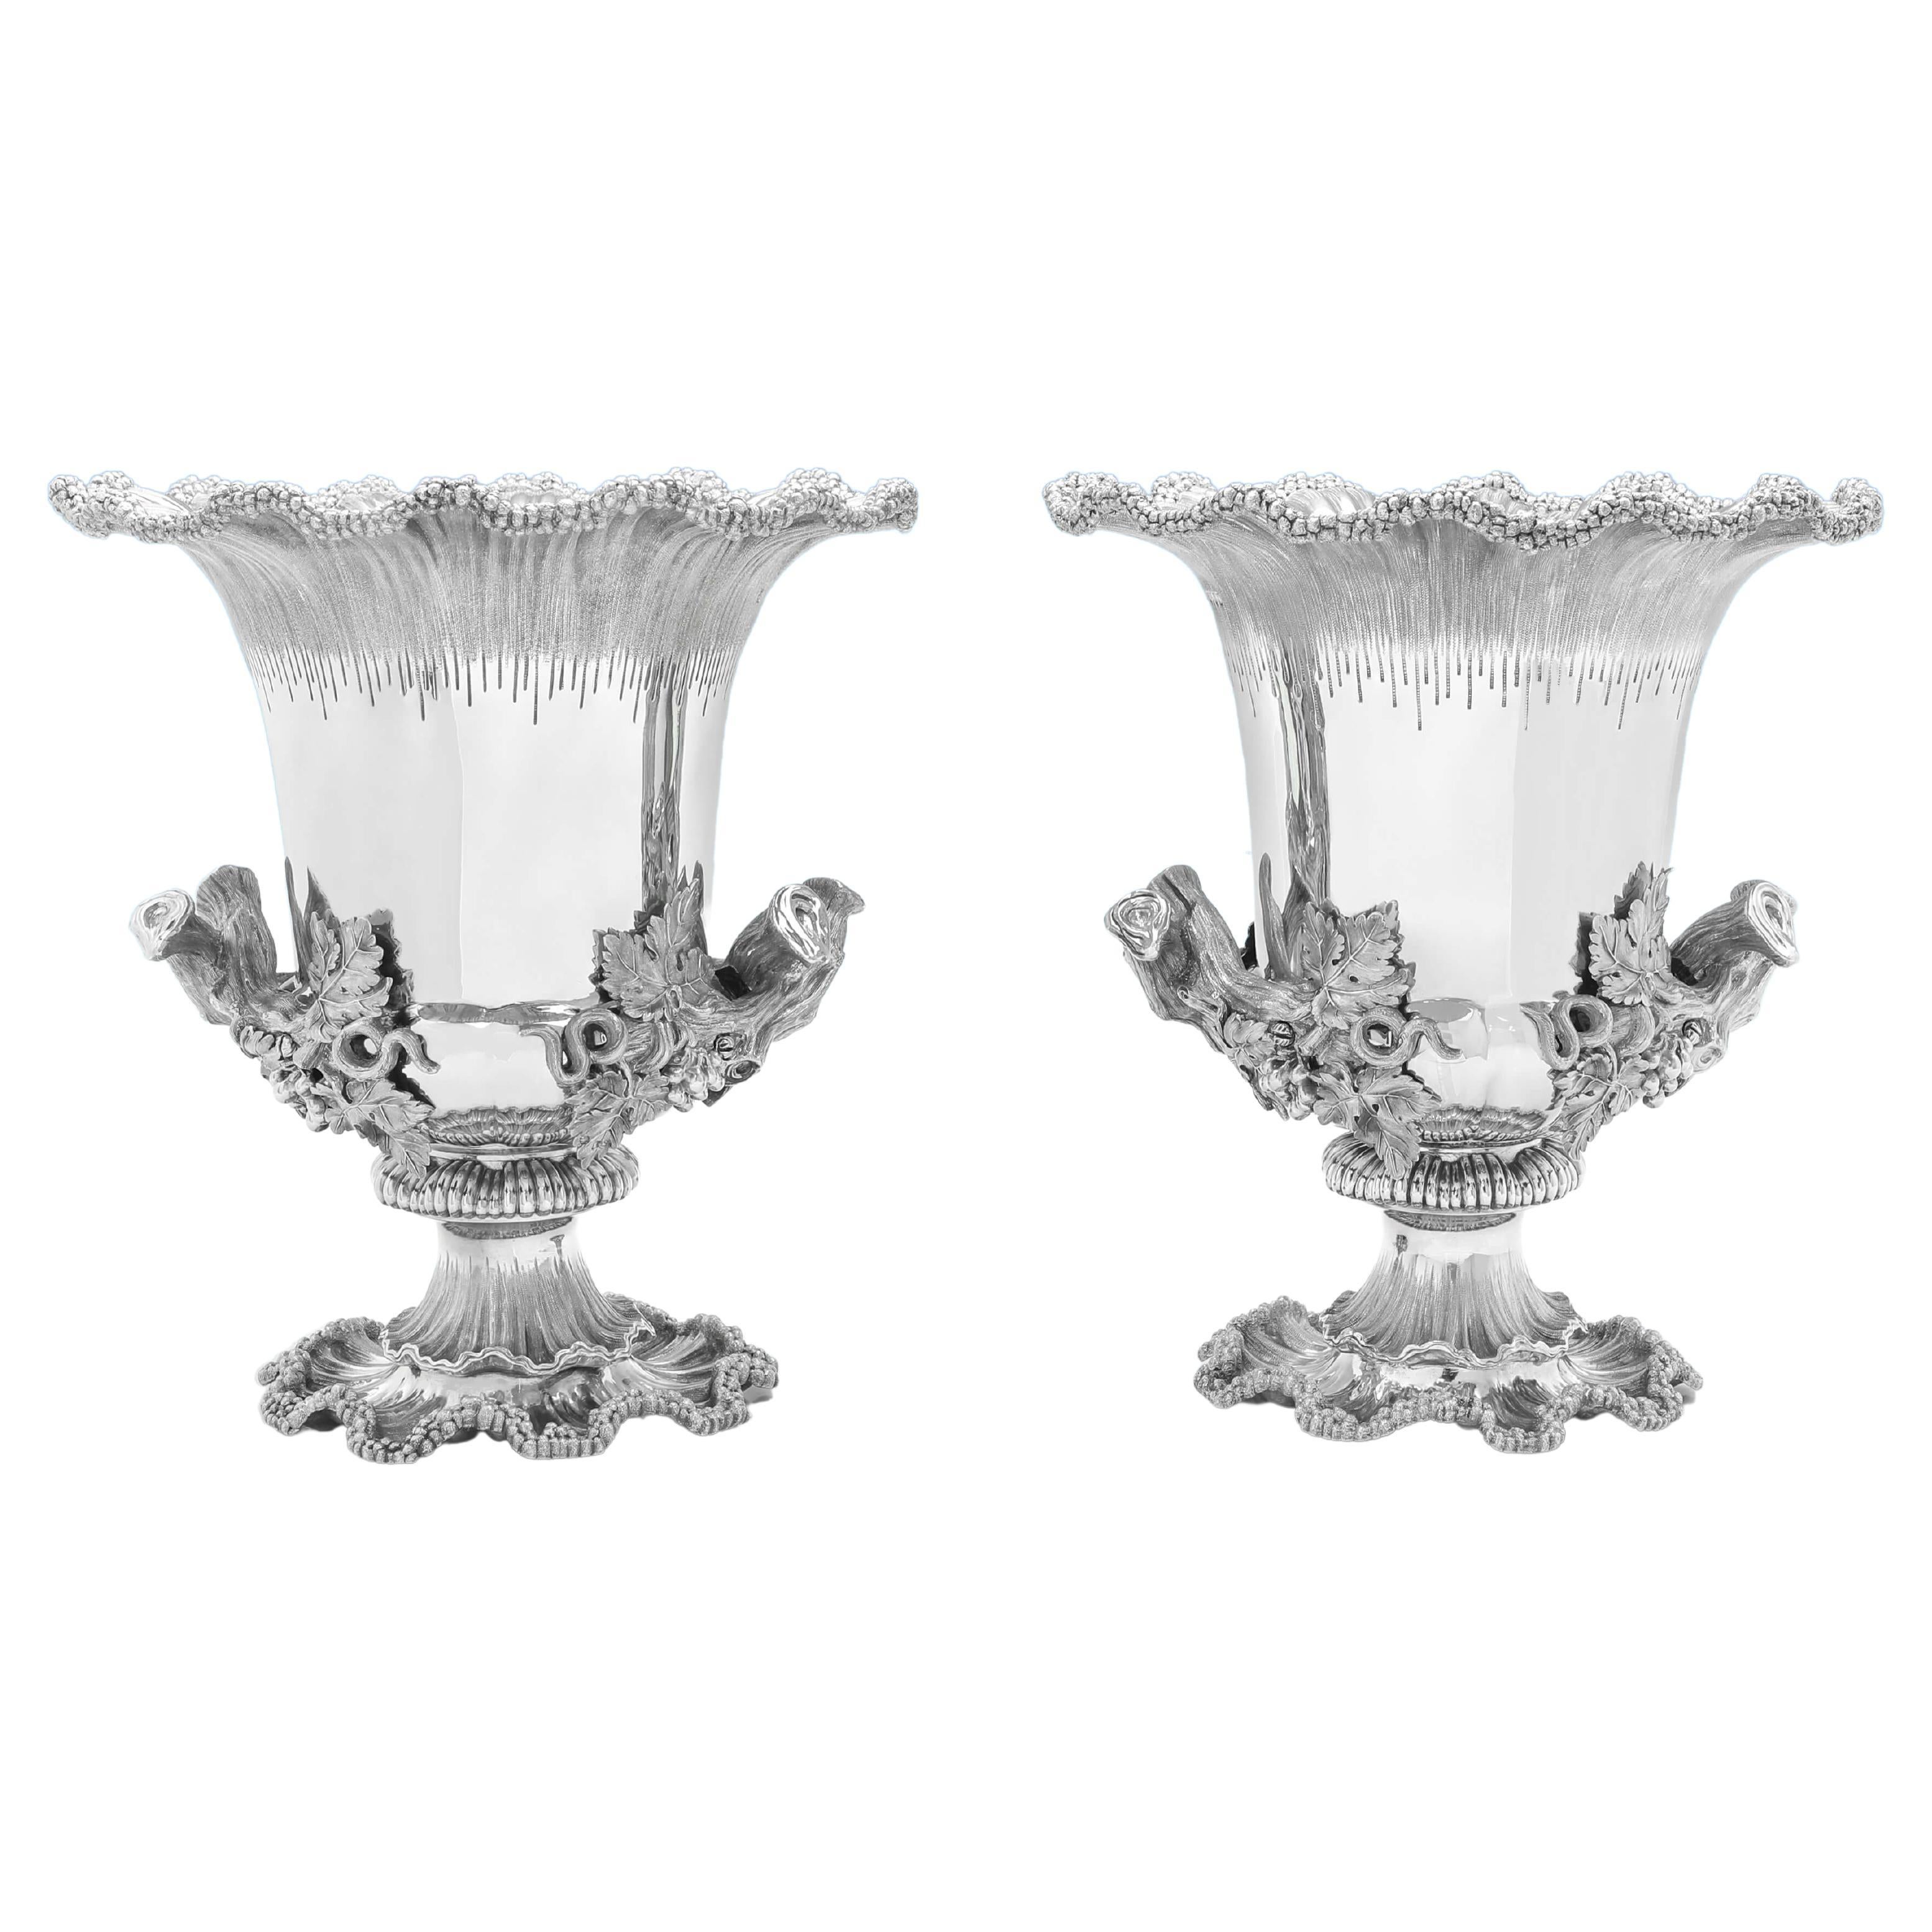 Incredible Pair of Victorian Sterling Silver Wine Coolers by Garrard & Co. 1887 For Sale